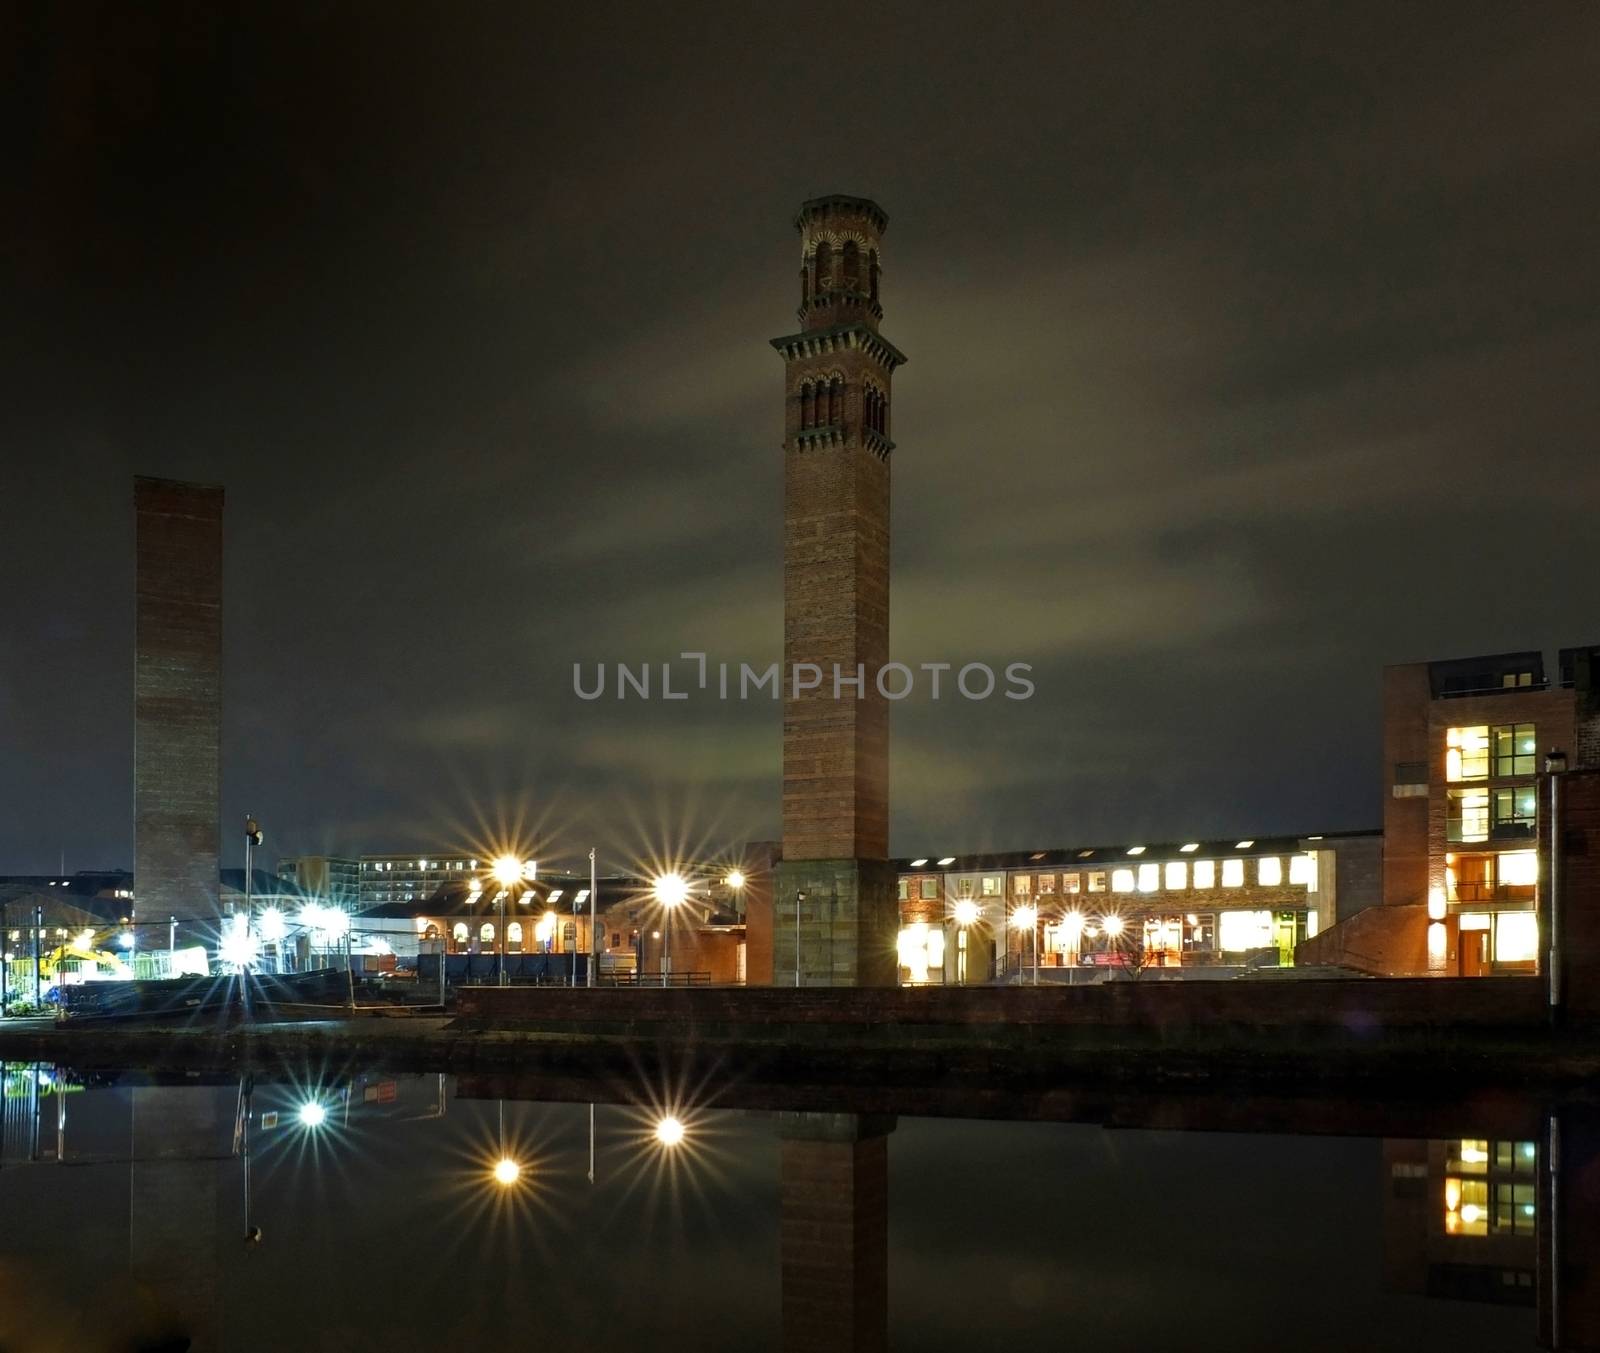 cityscape view of holbeck in south leeds showing the historic tower works at night with office building and lights reflected in the canal